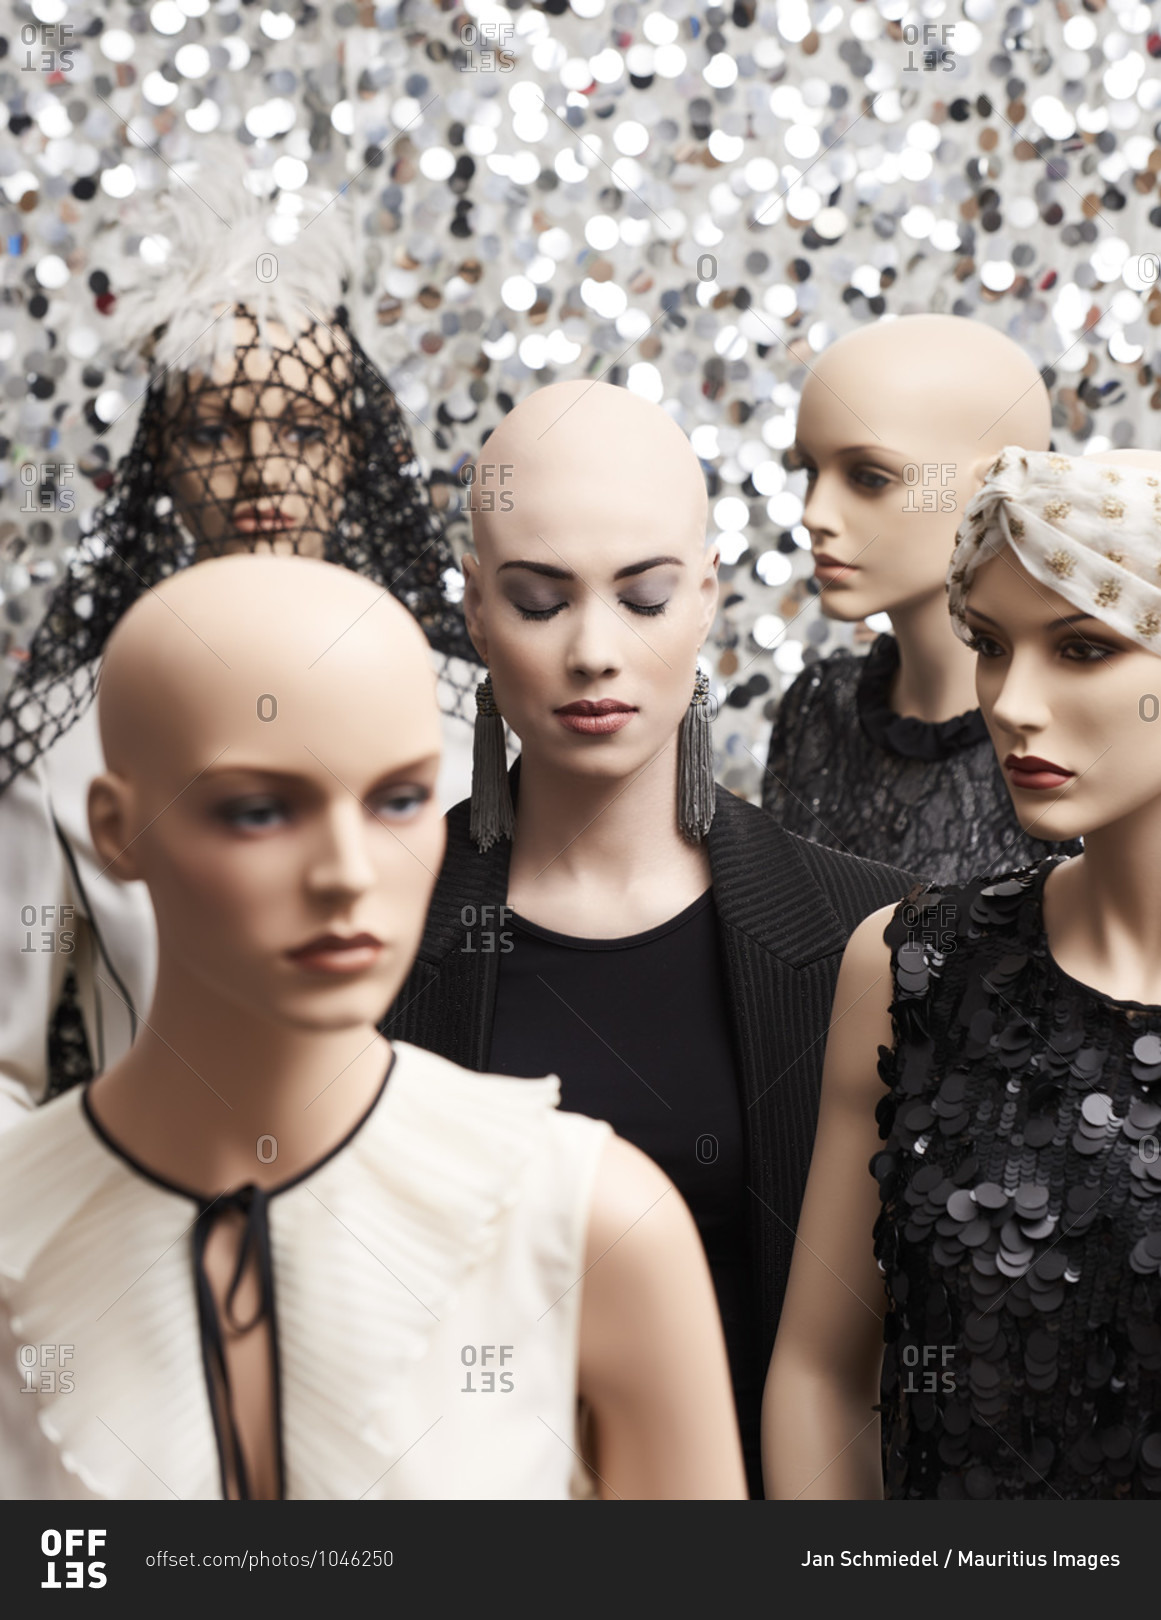 Woman / model and bald mannequins, decoration with fabrics